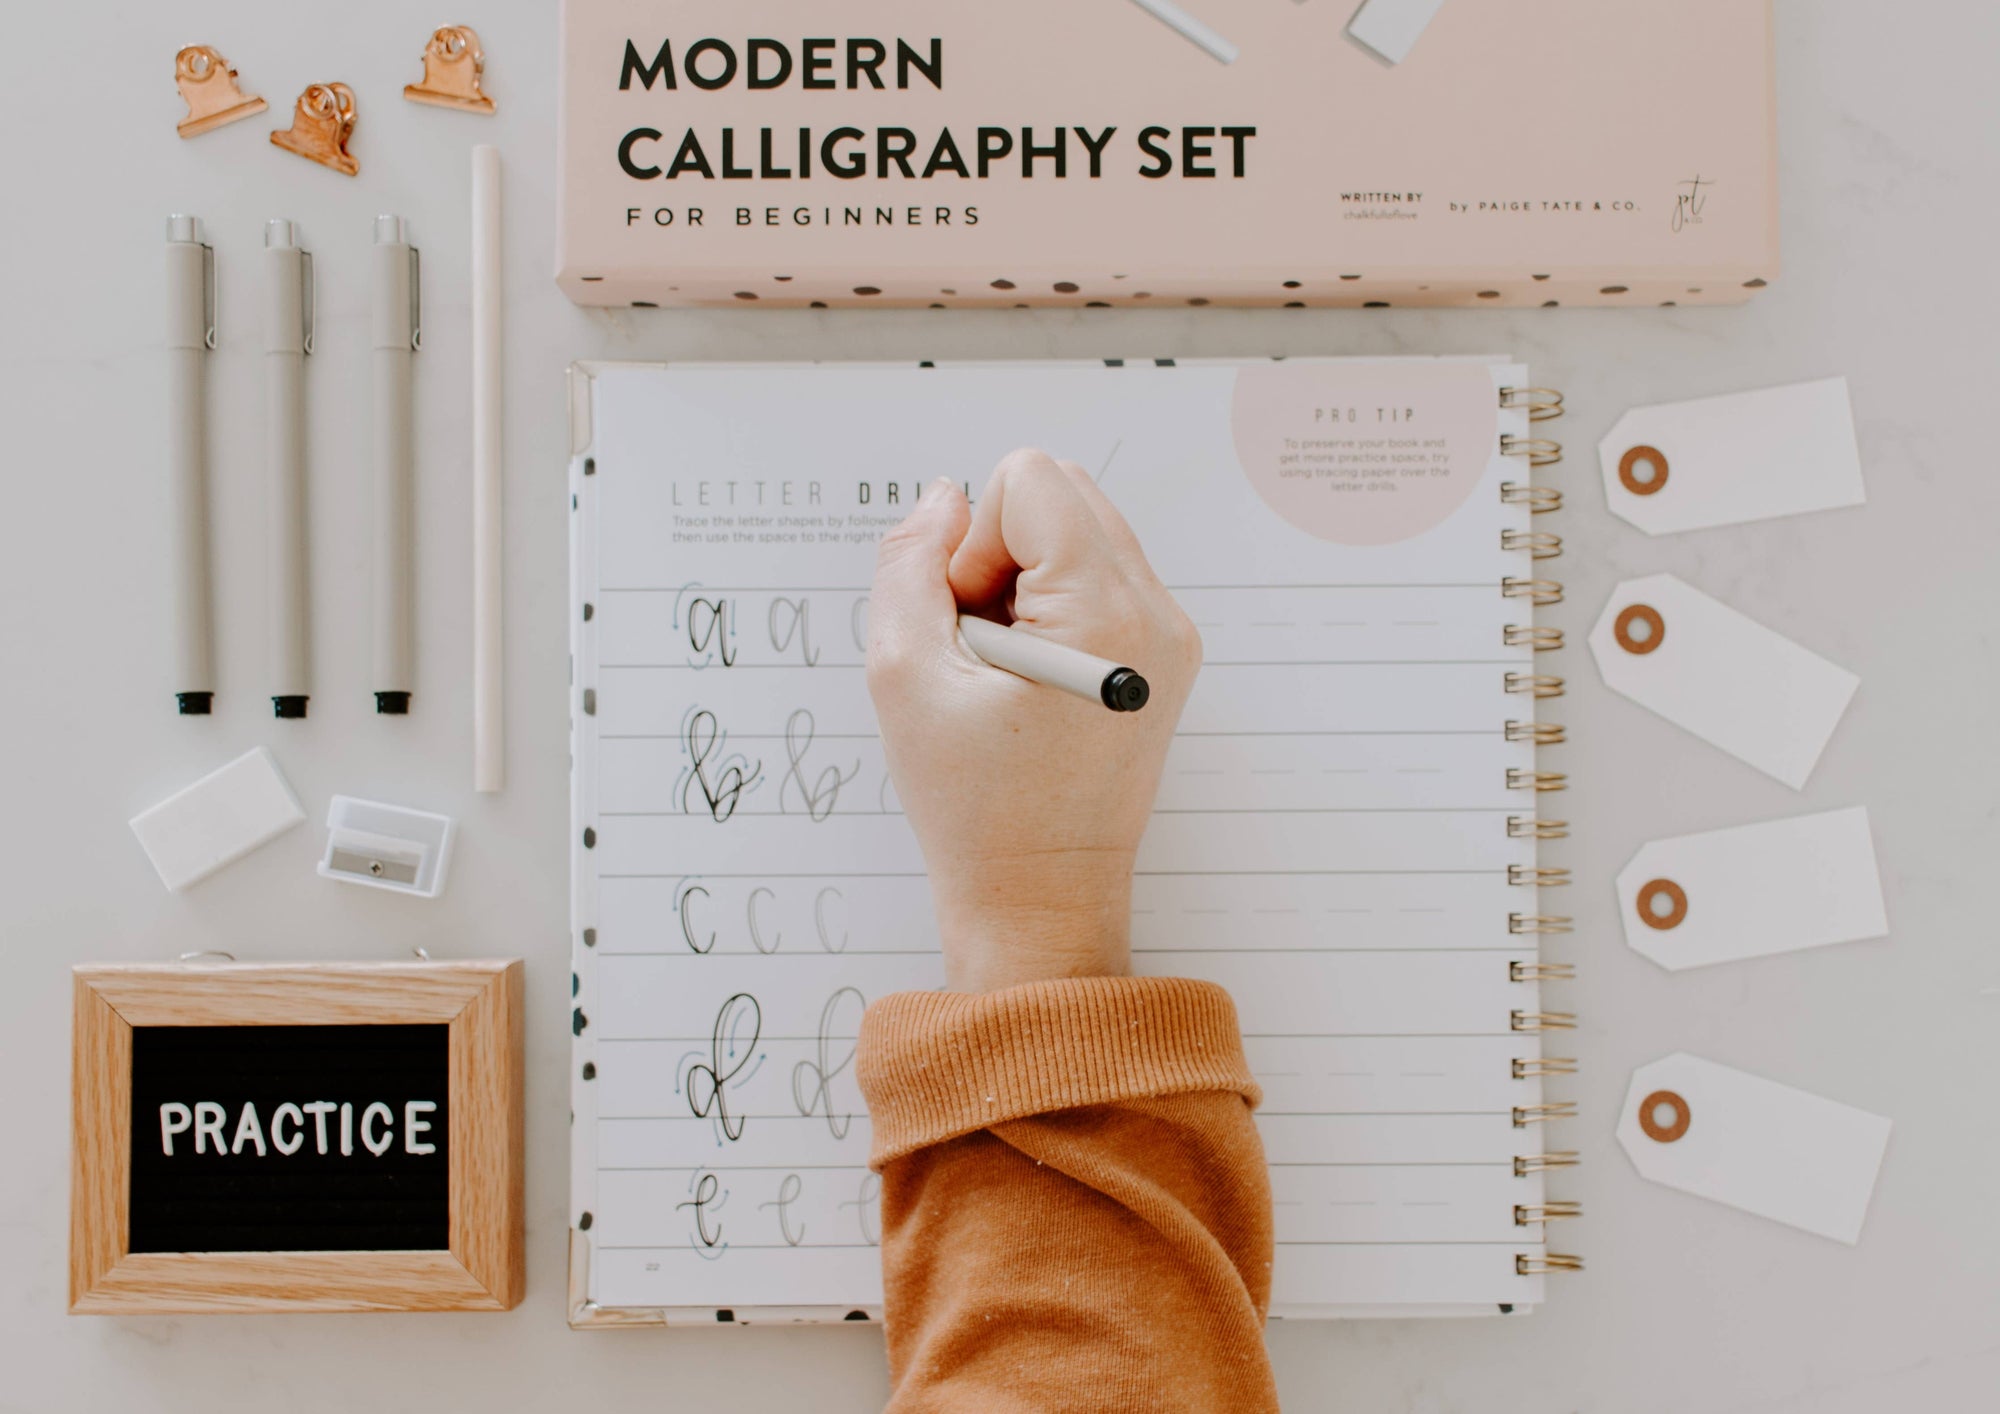 Gift set for Modern Calligraphy Set for Beginners enthusiasts.